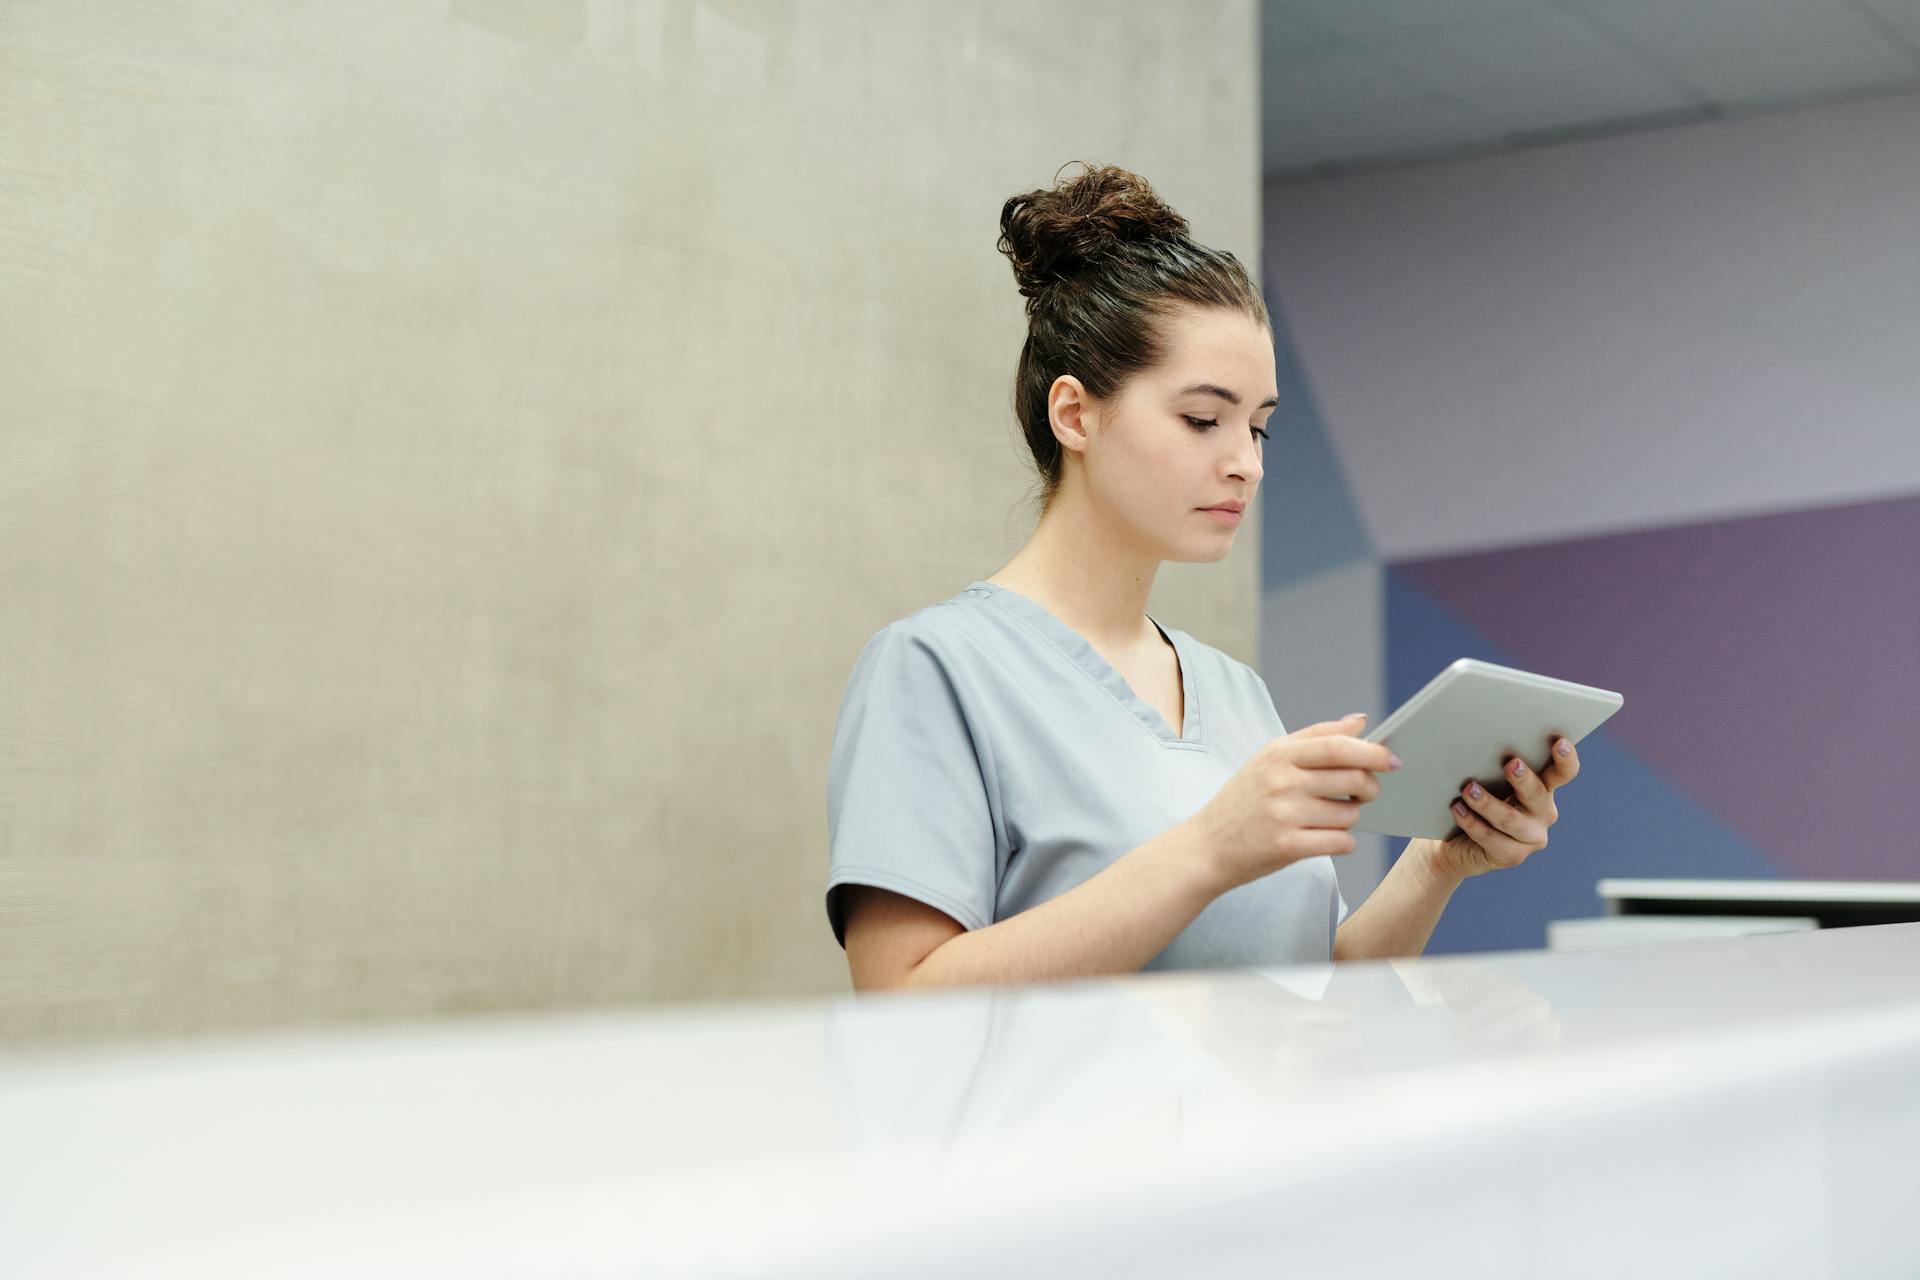 A receptionist holding a tablet | Source: Pexels